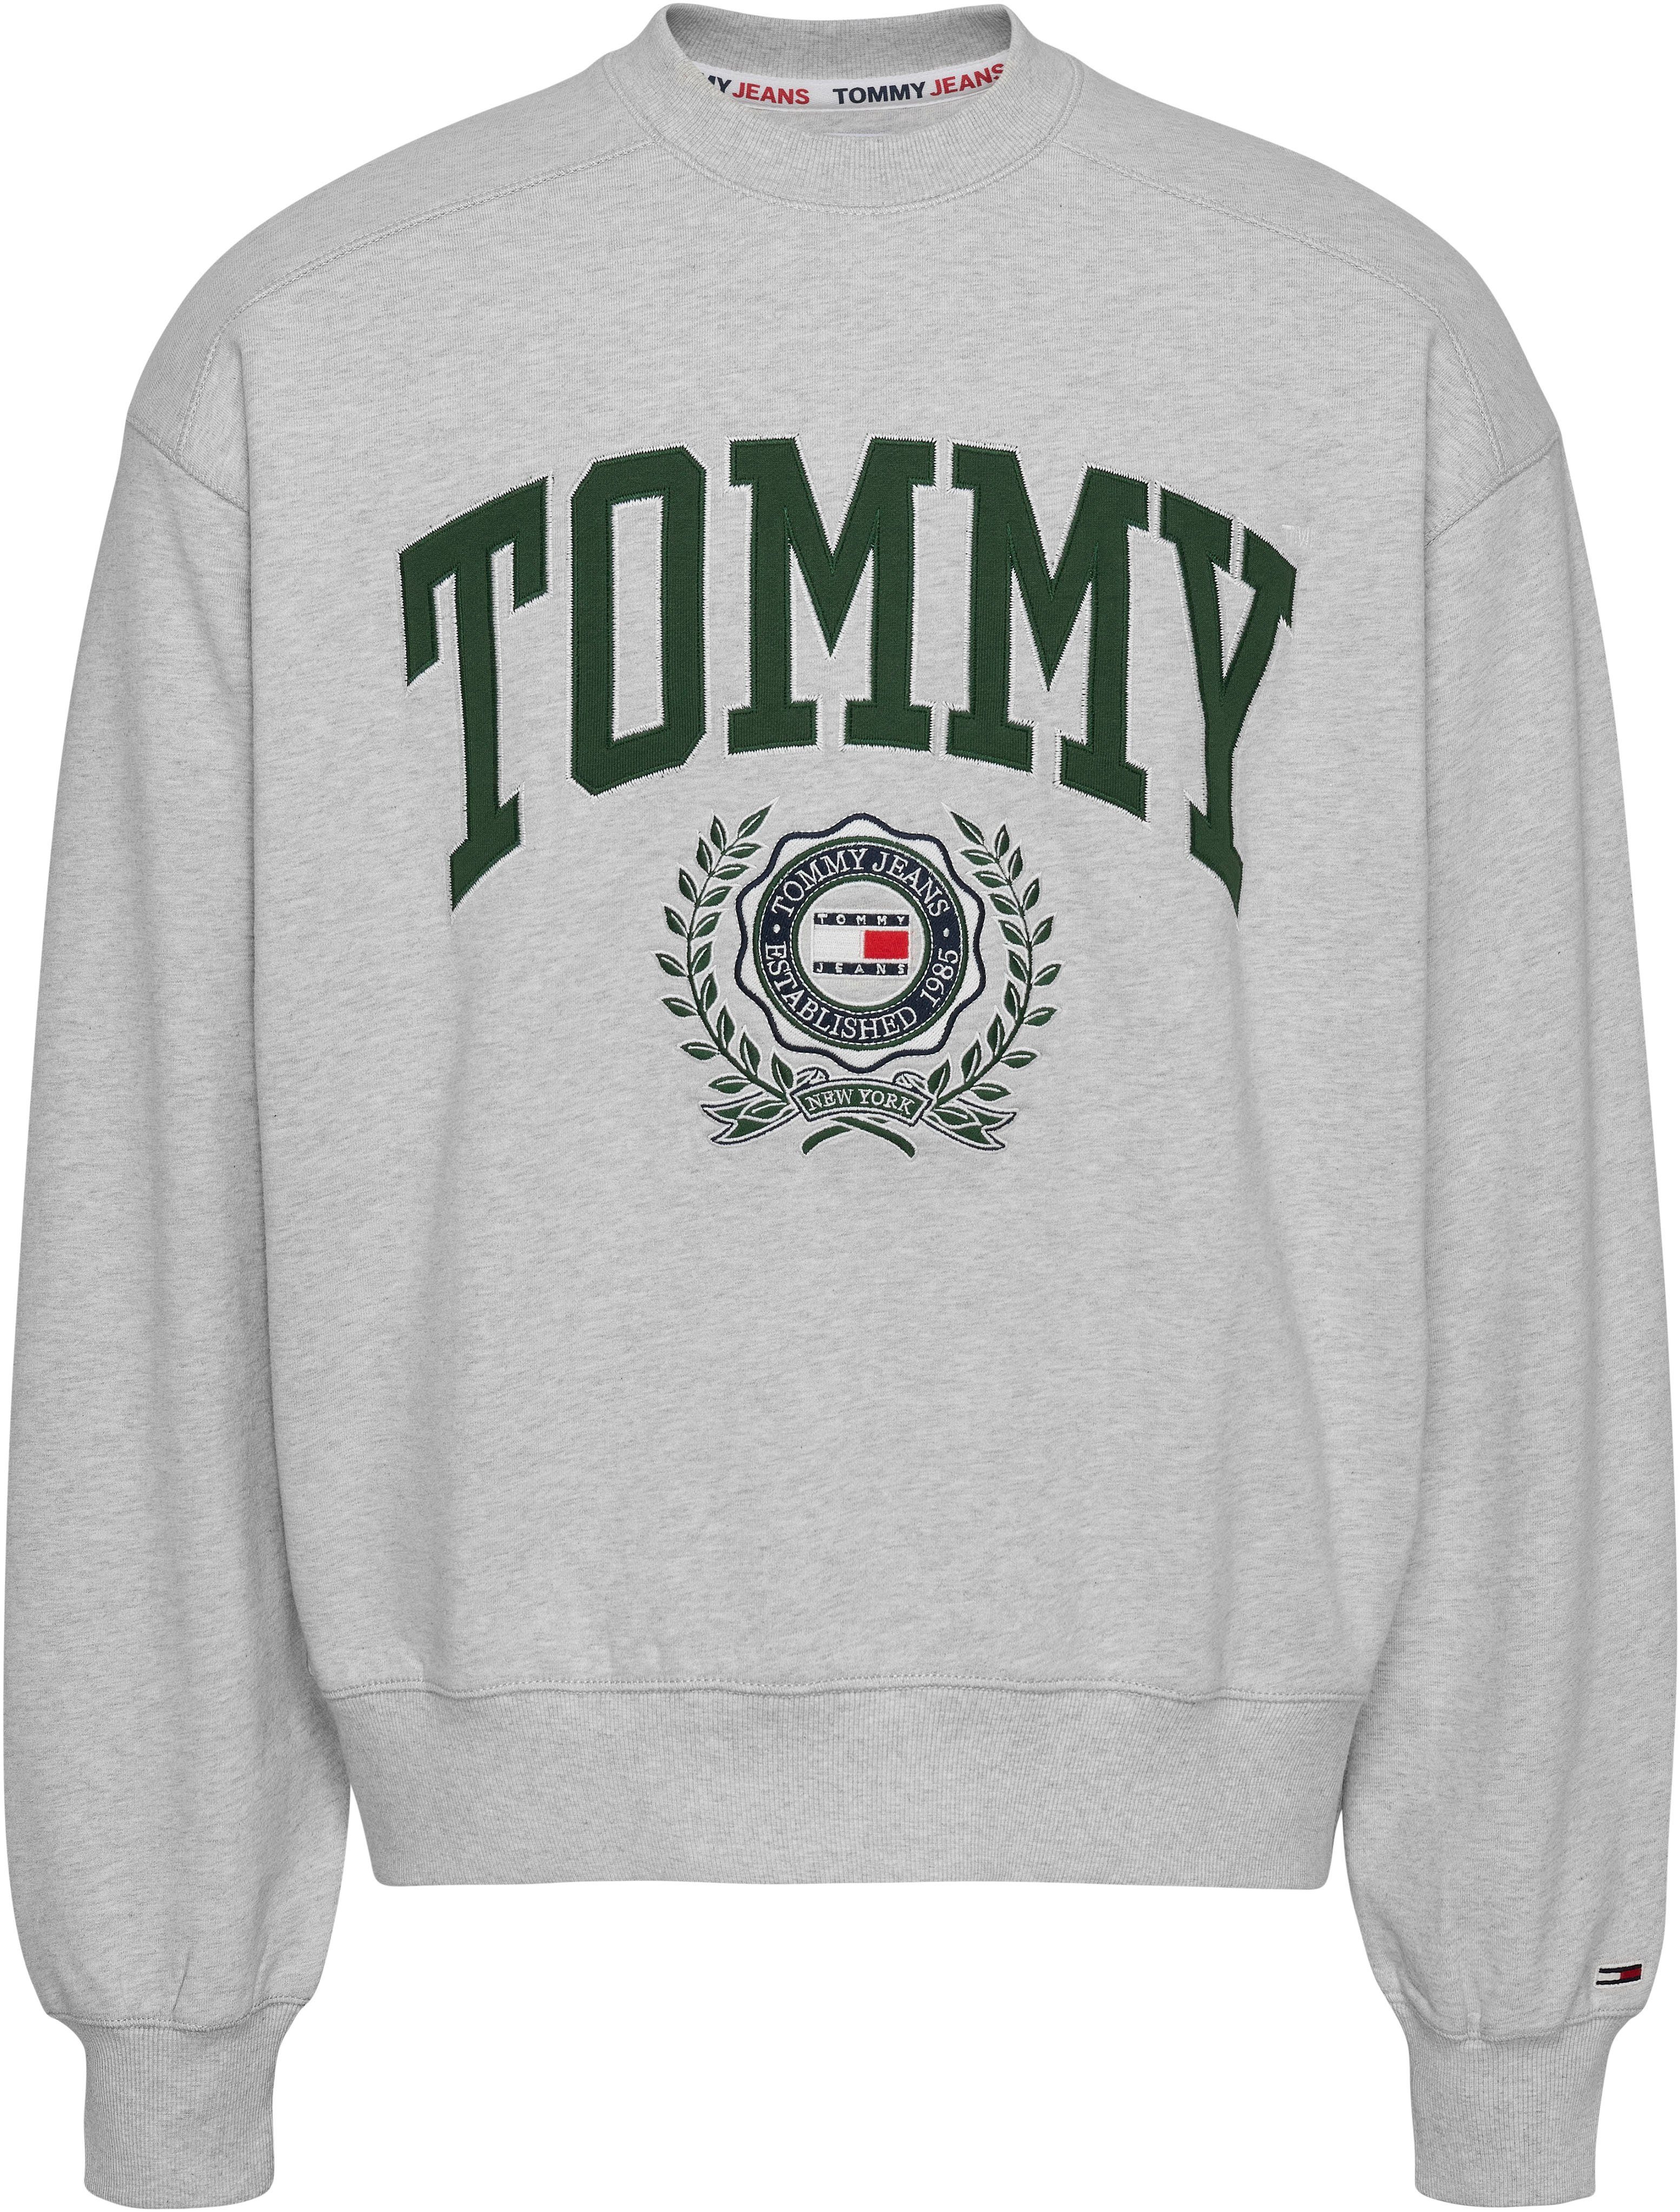 Tommy Jeans Sweatshirt TJM BOXY COLLEGE GRAPHIC CREW Silver Grey